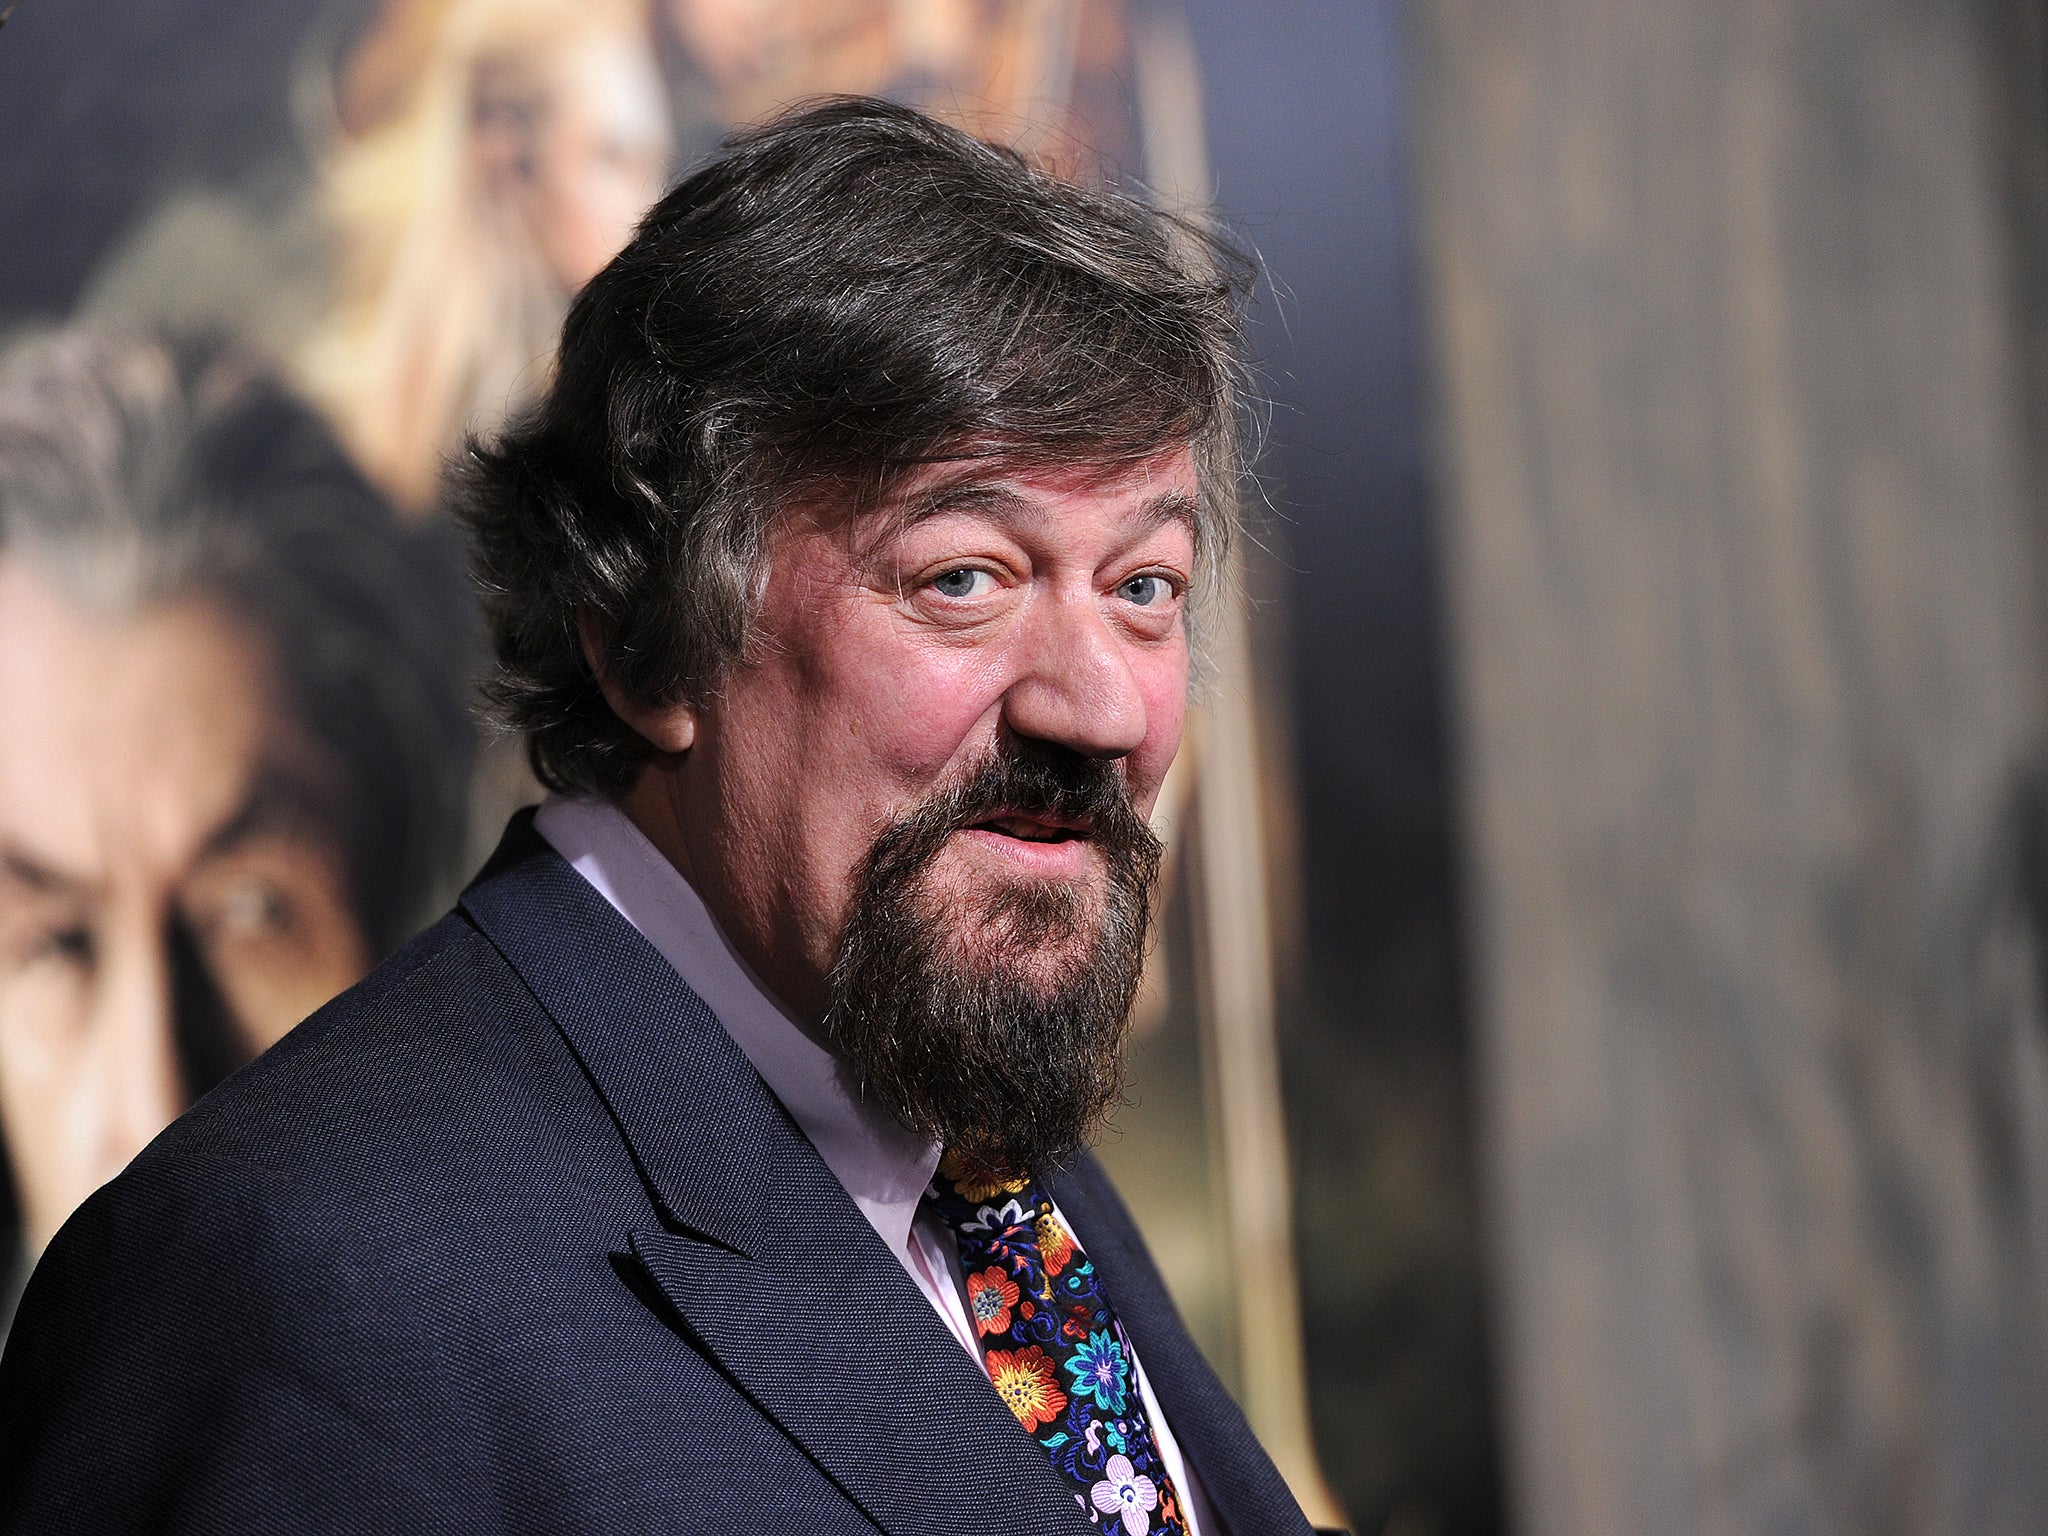 Stephen Fry says he has also used the class-A drug in the House of Lords and House of Commons